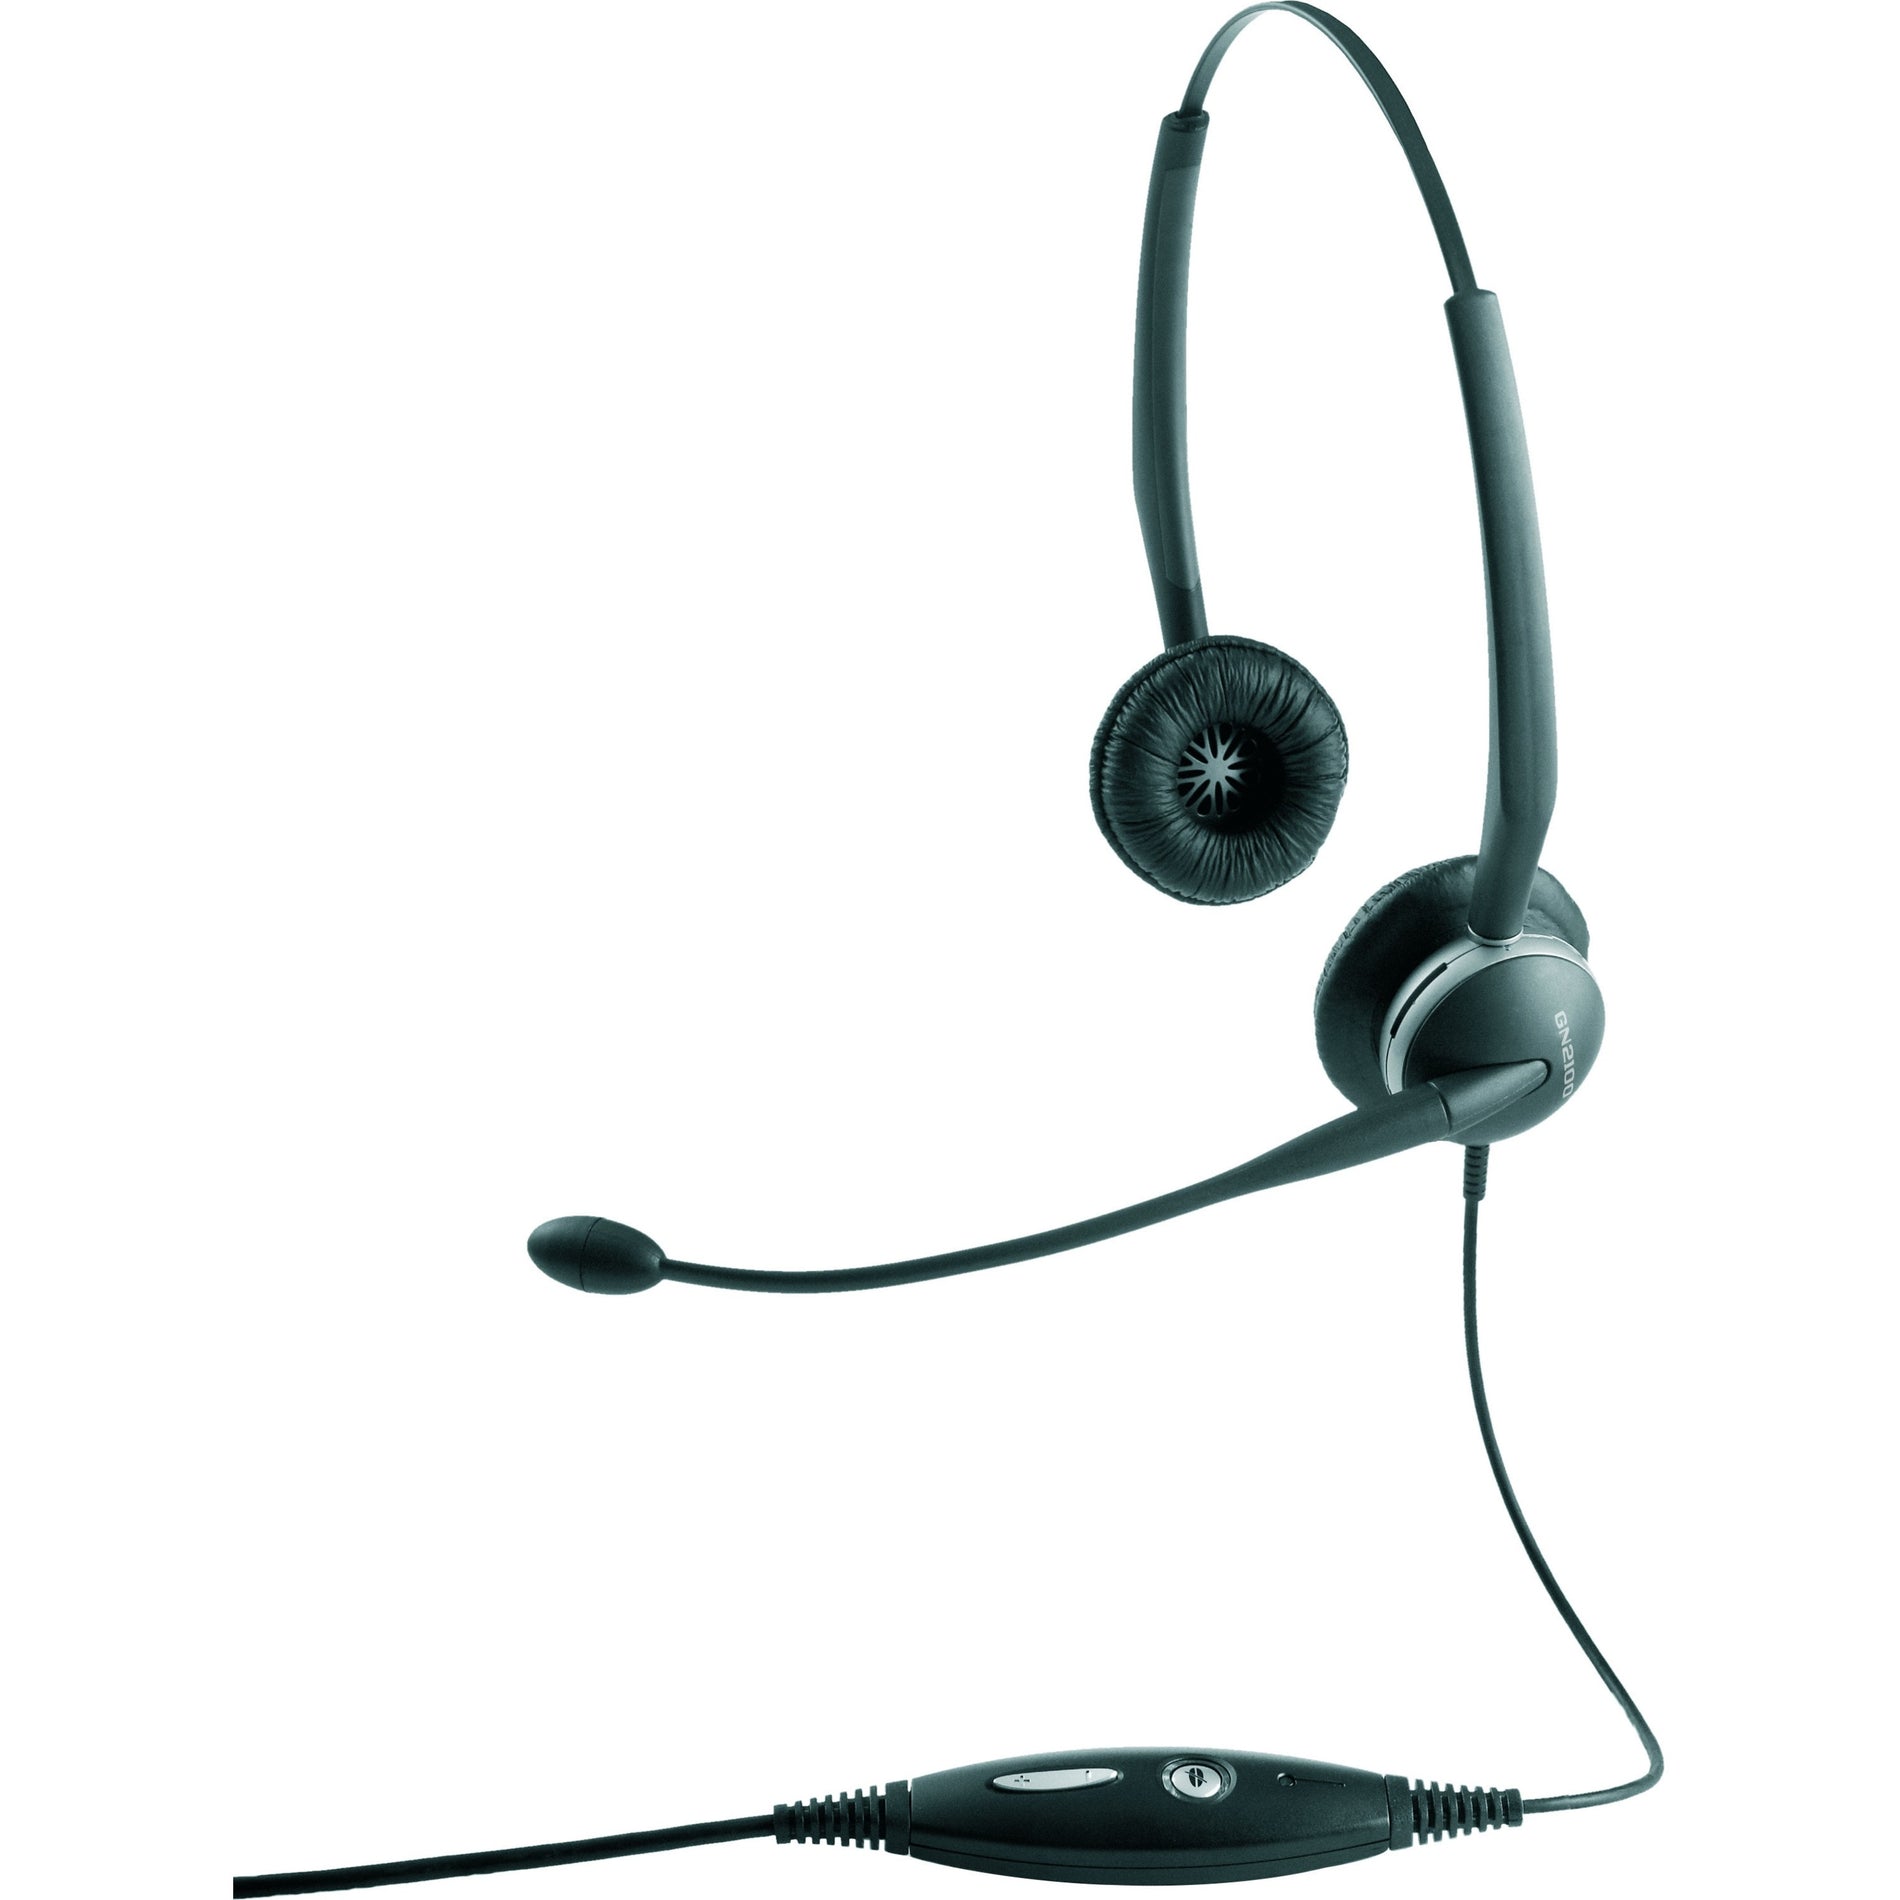 Jabra GSA2104-820-105 GN2100 Headset, Monaural Over-the-head Behind-the-neck Over-the-ear, Noise Cancelling, 2 Year Warranty